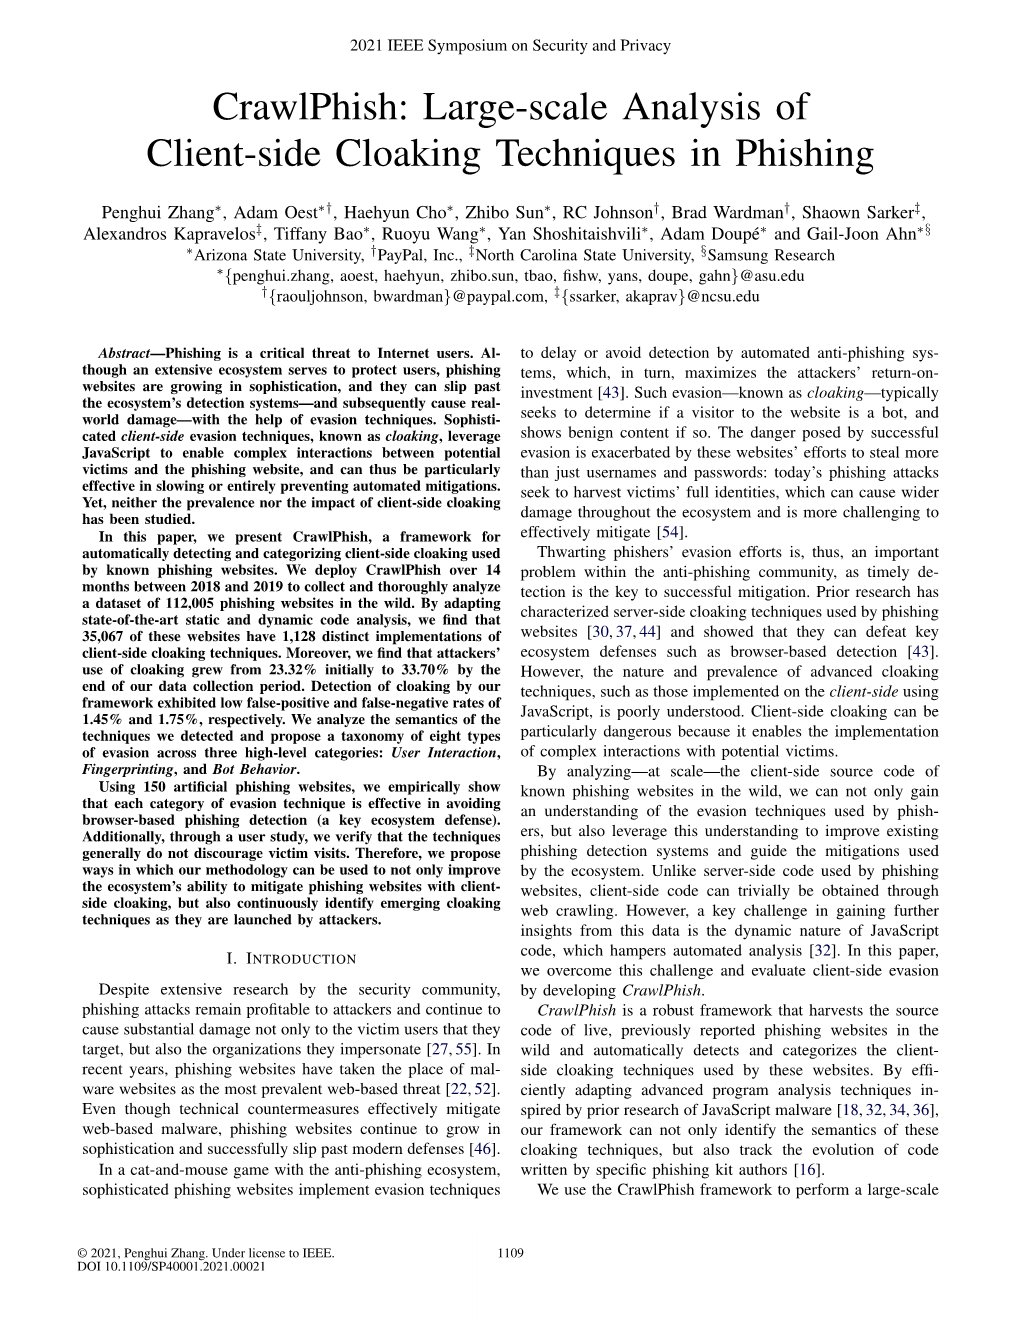 Large-Scale Analysis of Client-Side Cloaking Techniques in Phishing